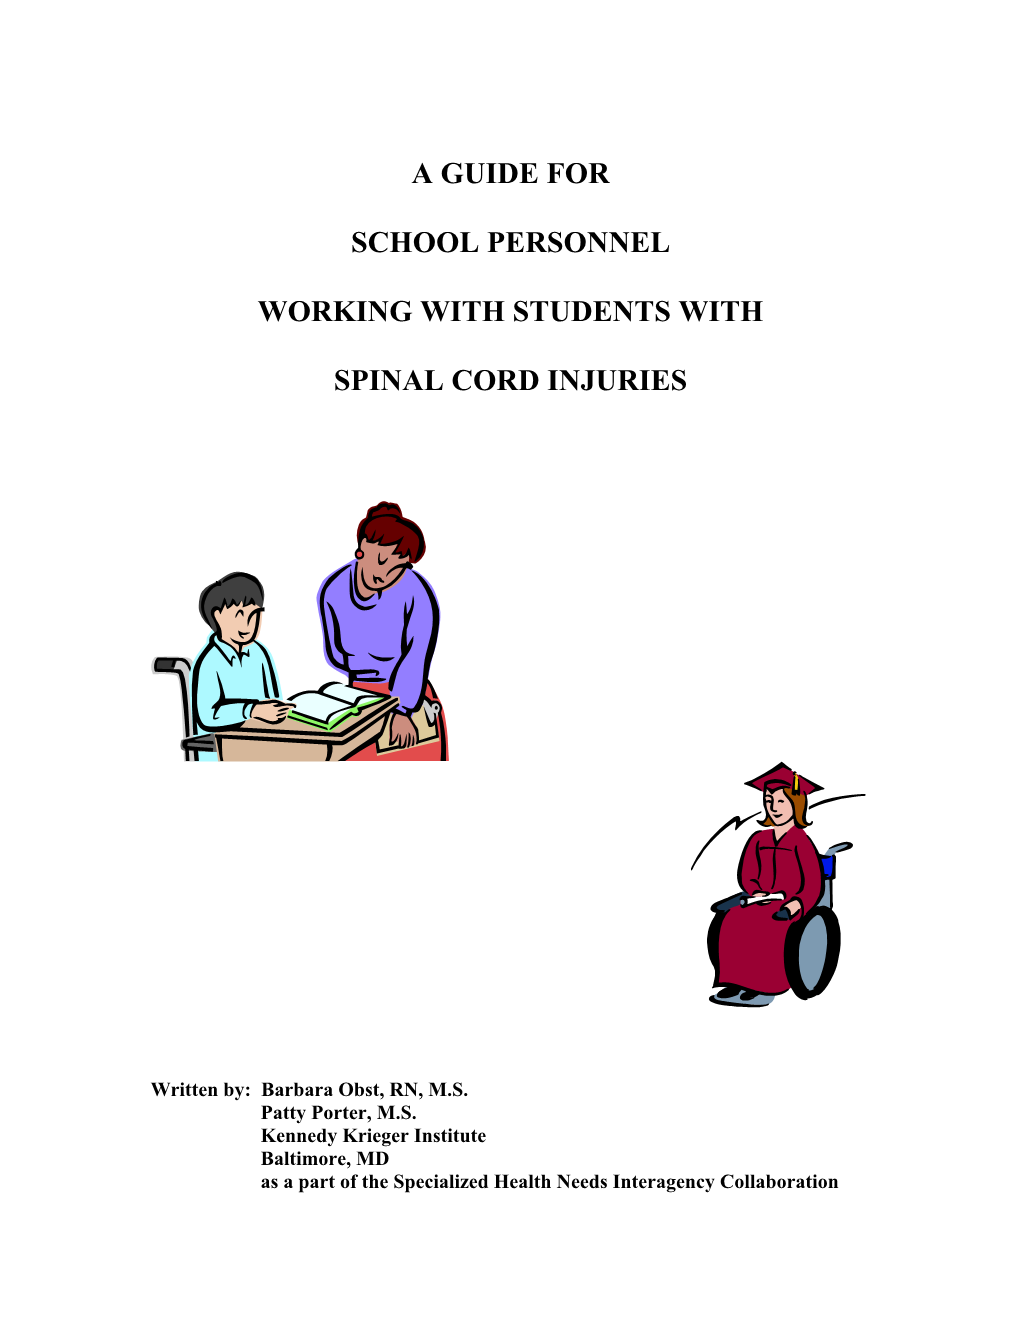 Guide for School Personnel Working with Students with Spinal Cord